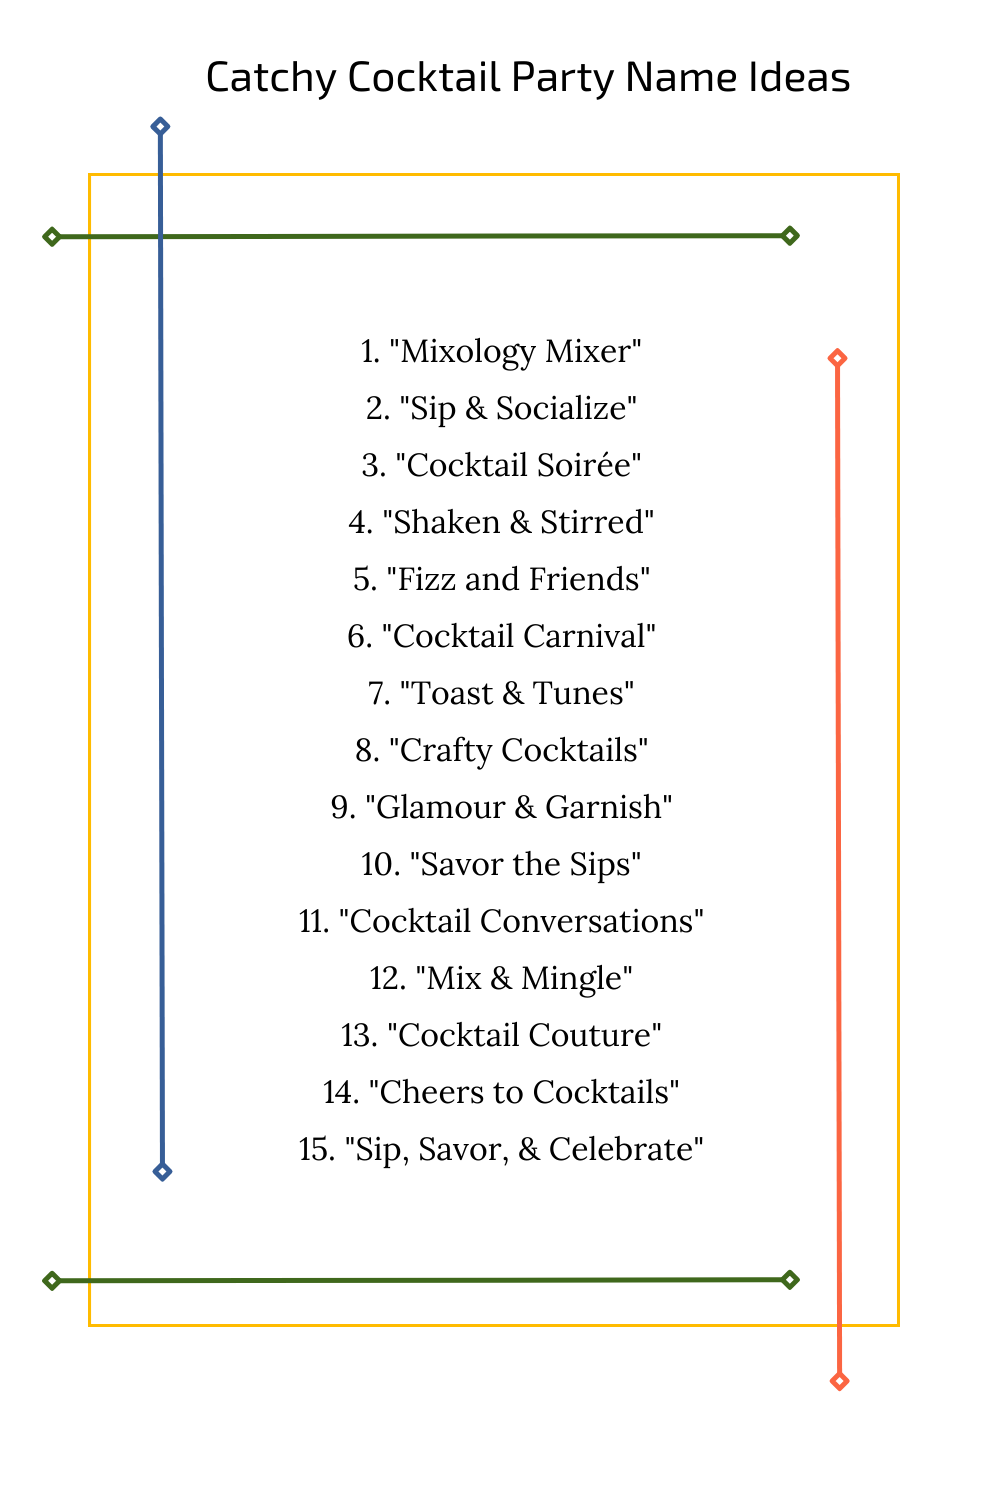 Catchy Cocktail Party Name Ideas